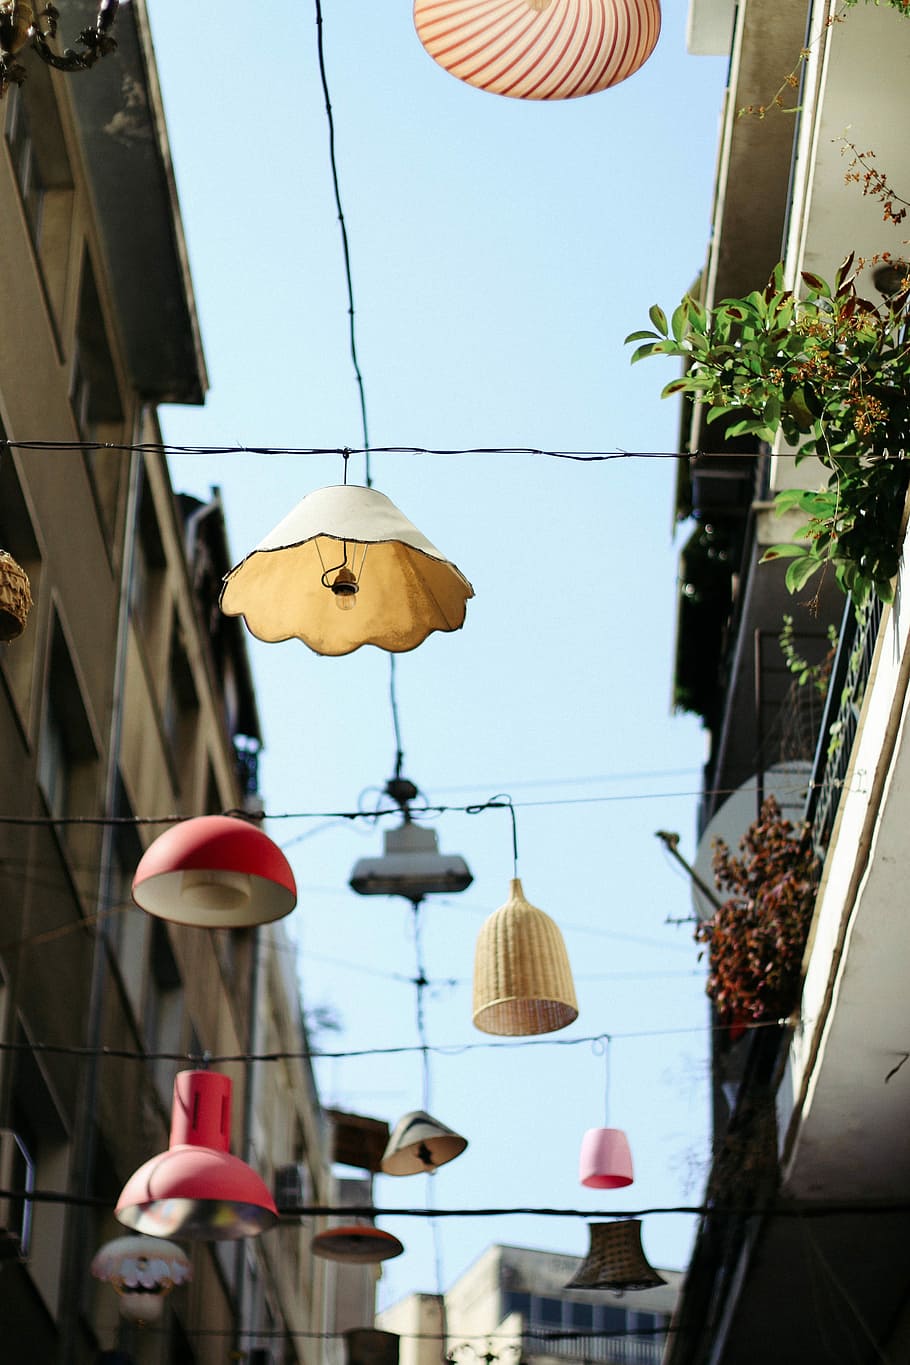 assorted hanging light, light, electric Lamp, lantern, architecture, urban Scene, hanging, day, built structure, low angle view